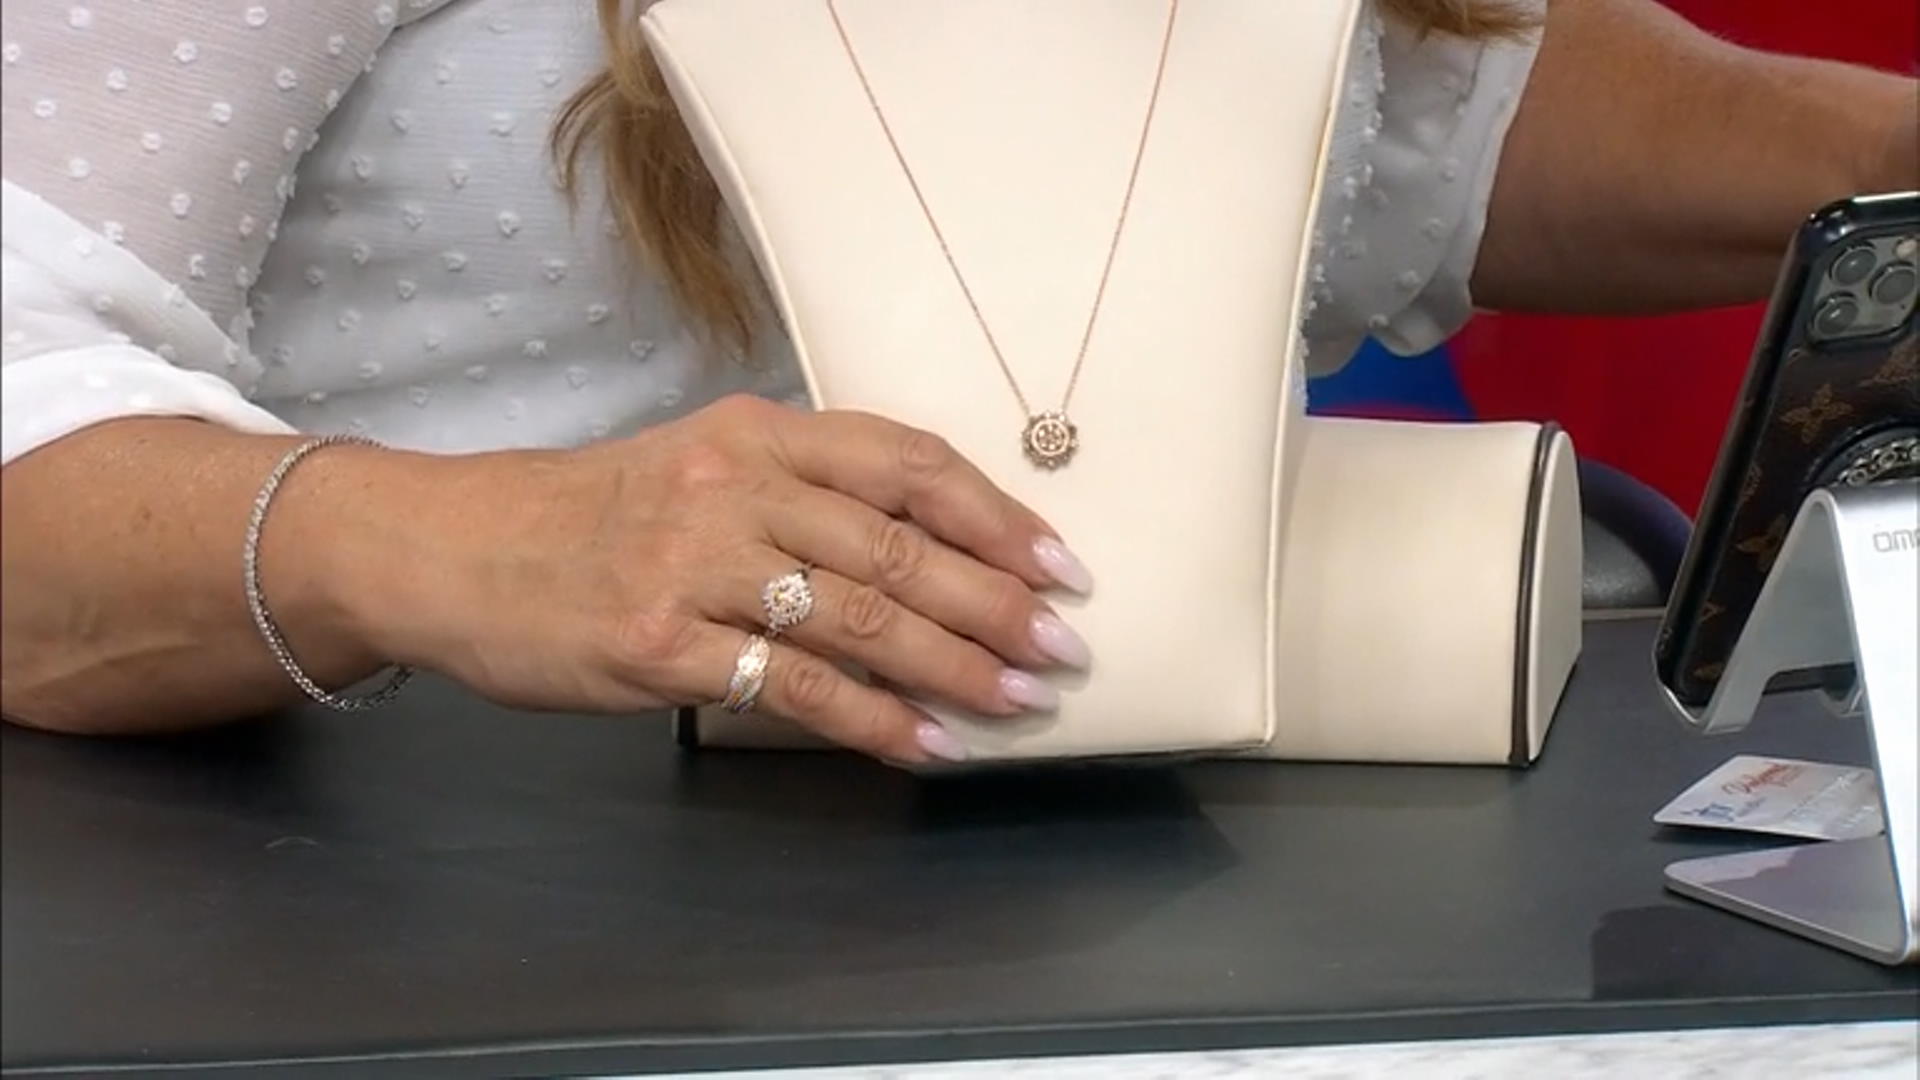 Champagne Diamond 14K Rose Gold Over Sterling Silver Cluster Necklace 0.80ctw Video Thumbnail